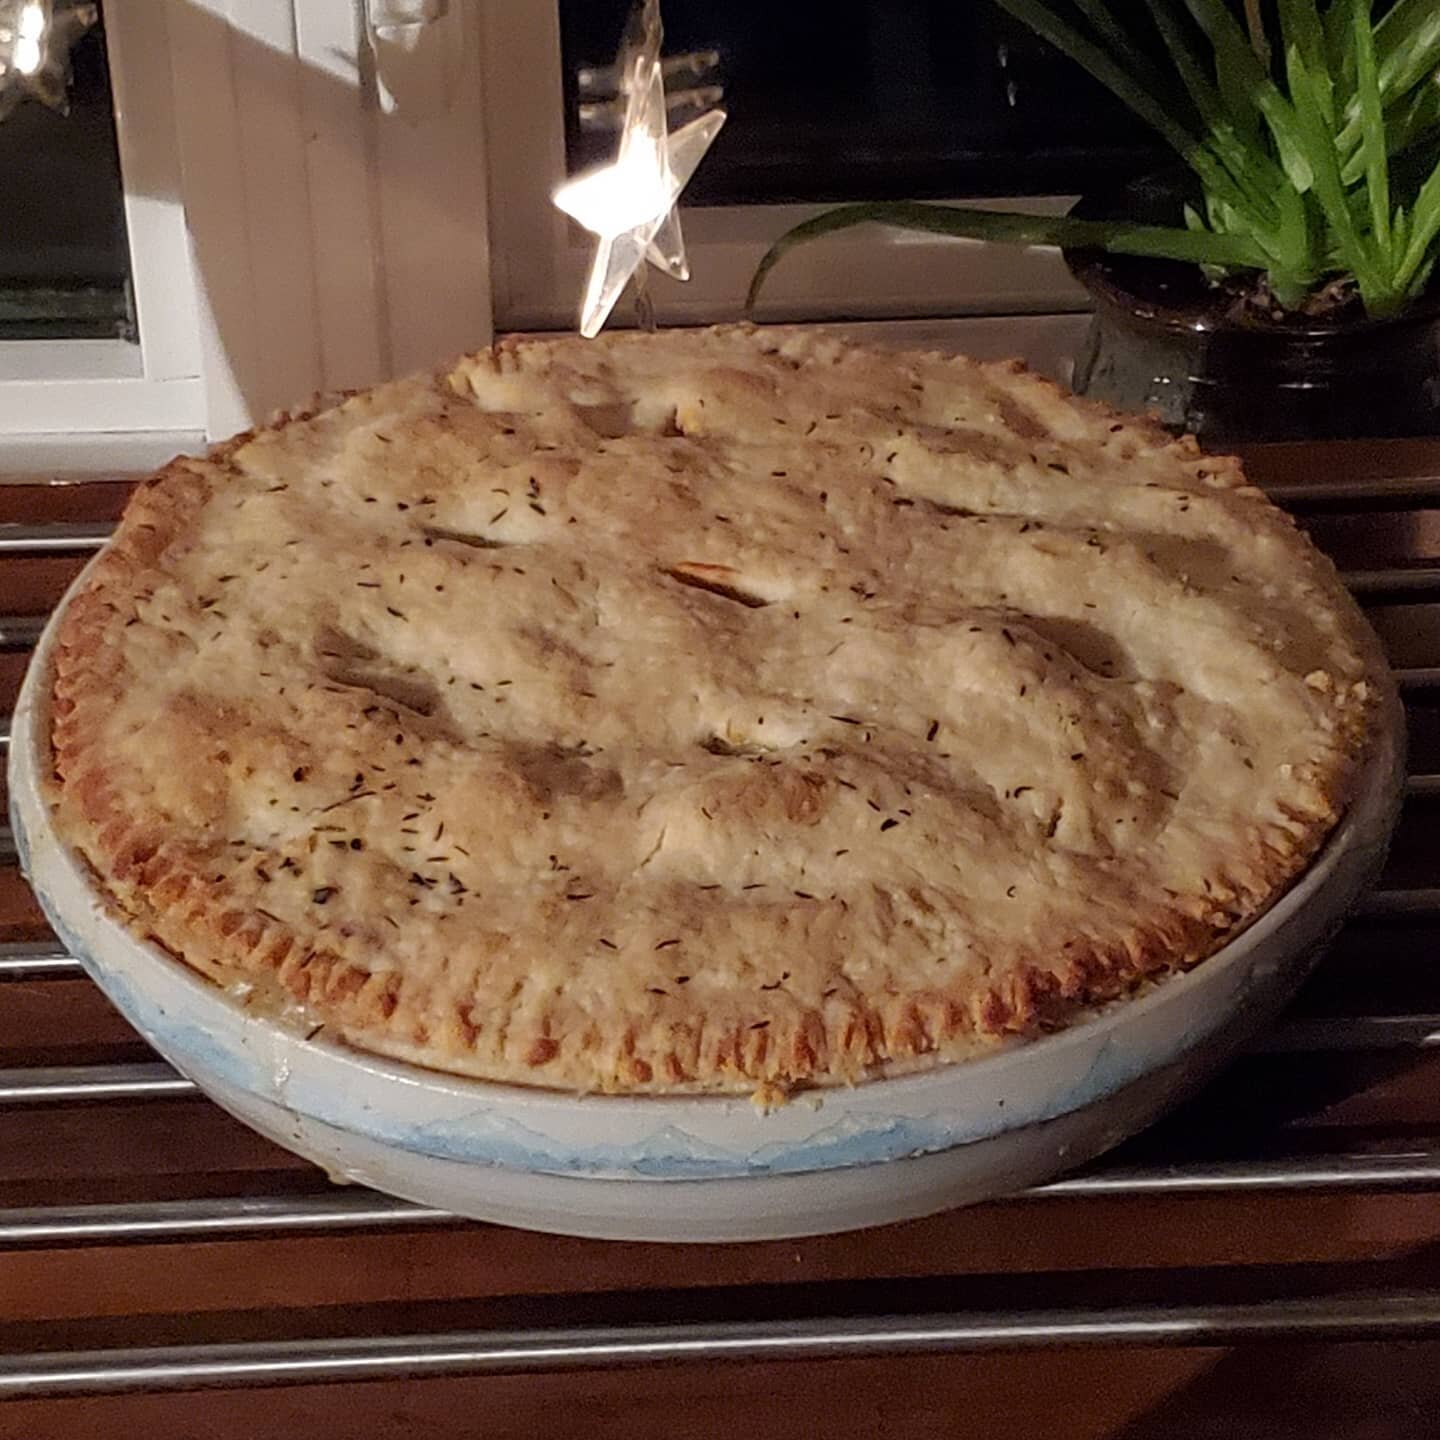 Carl couldn't resist quality testing this pie plate ❤ Chef approved ✅ Homemade pot pie + in home made pie plate = best winter solstice ever (oh and the big dump of snow is pretty awesome too ❄)

#madewithlove #ciarajayneceramics #ciarajayne #craft #m